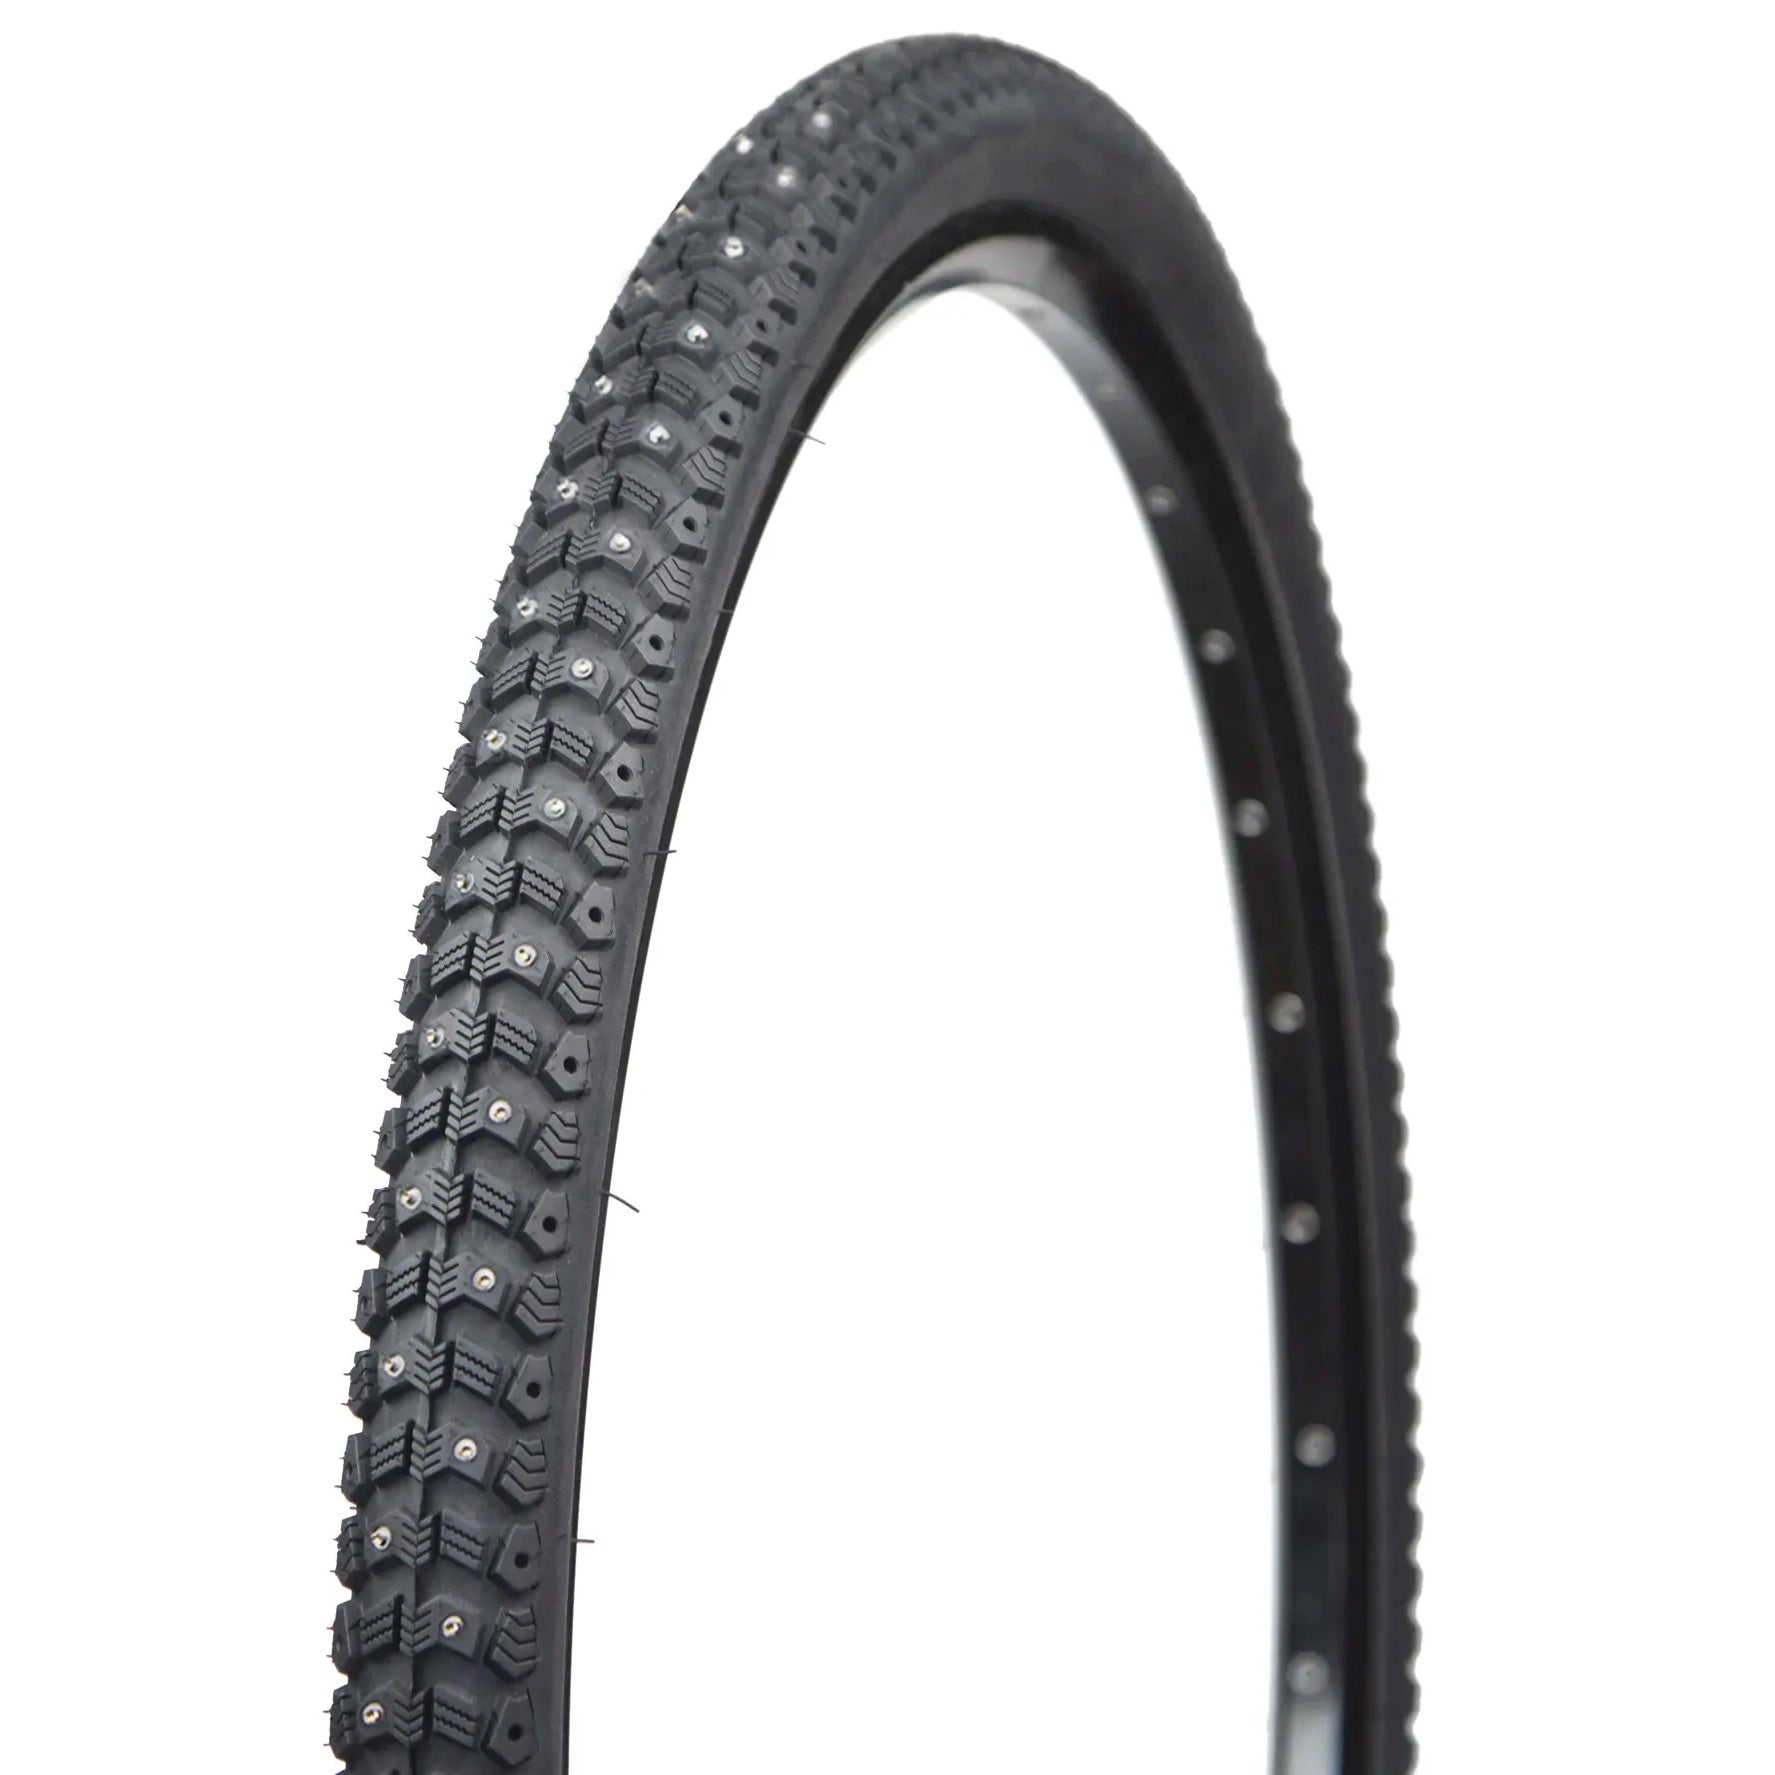 Terrene Griswold Studded Tire 700 x 38c Black